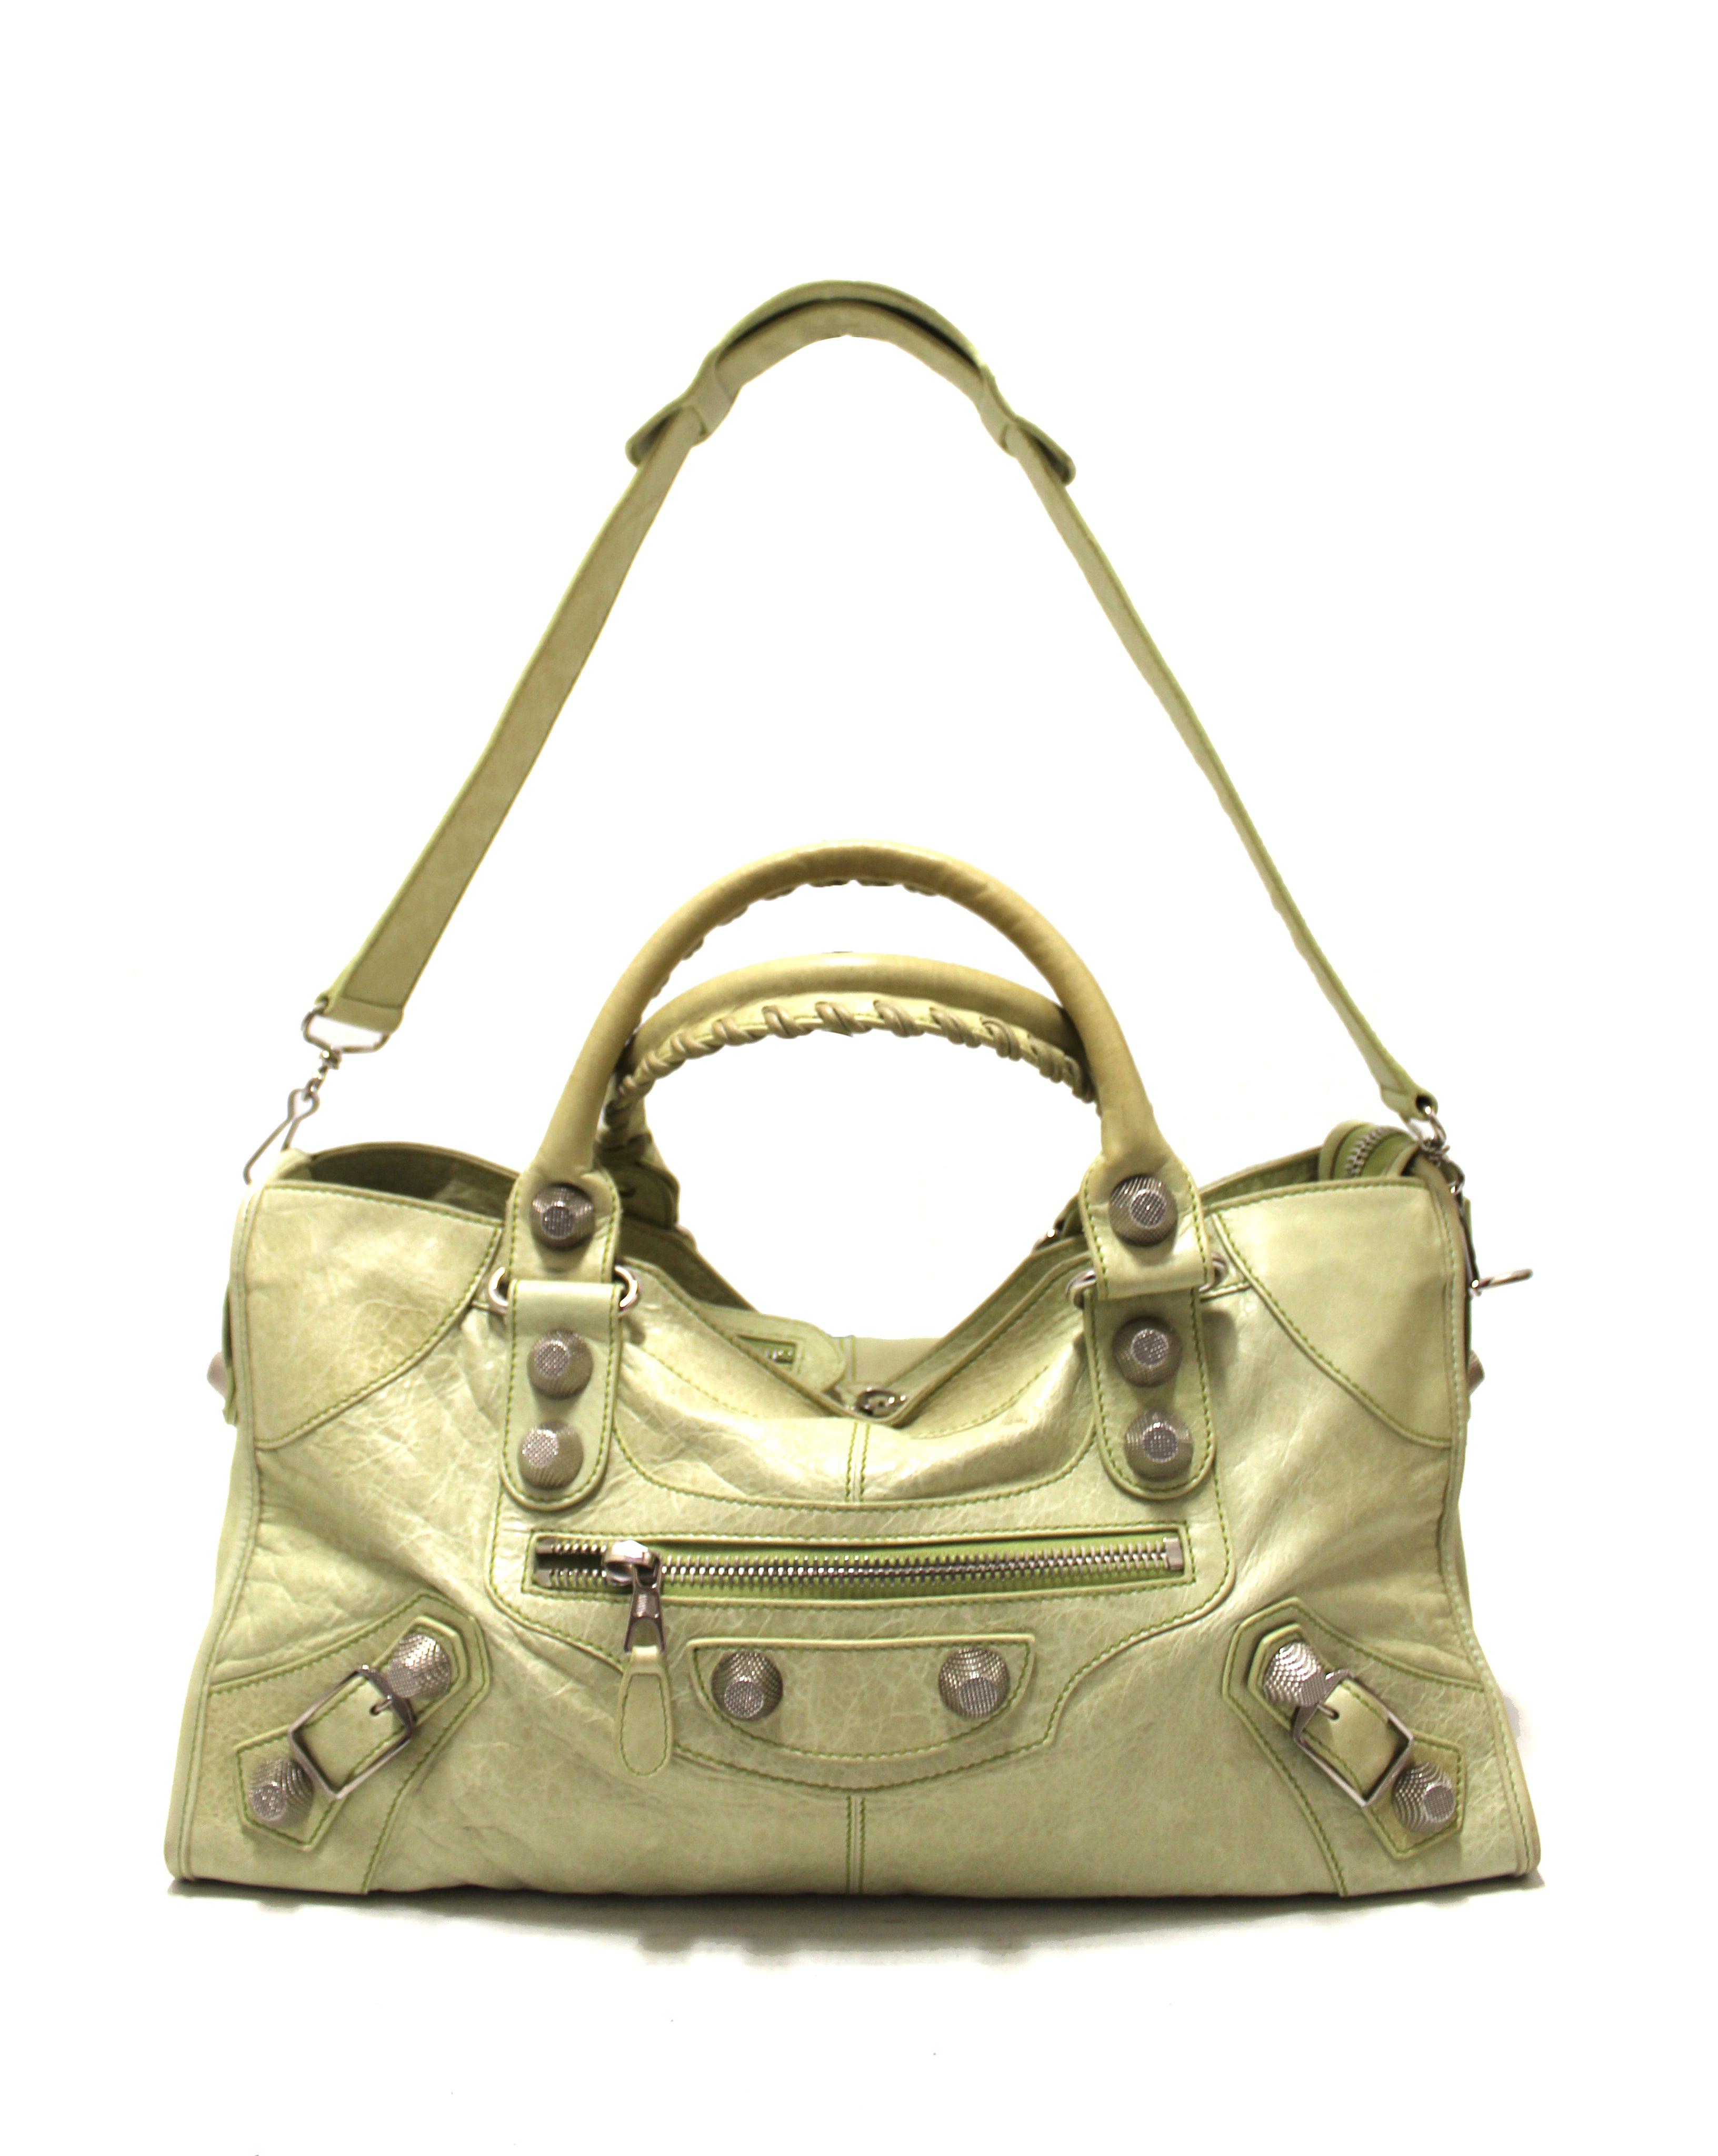 Authentic Balenciaga Lime Green Lambskin Leather Giant City Hand/Shoulder Bag